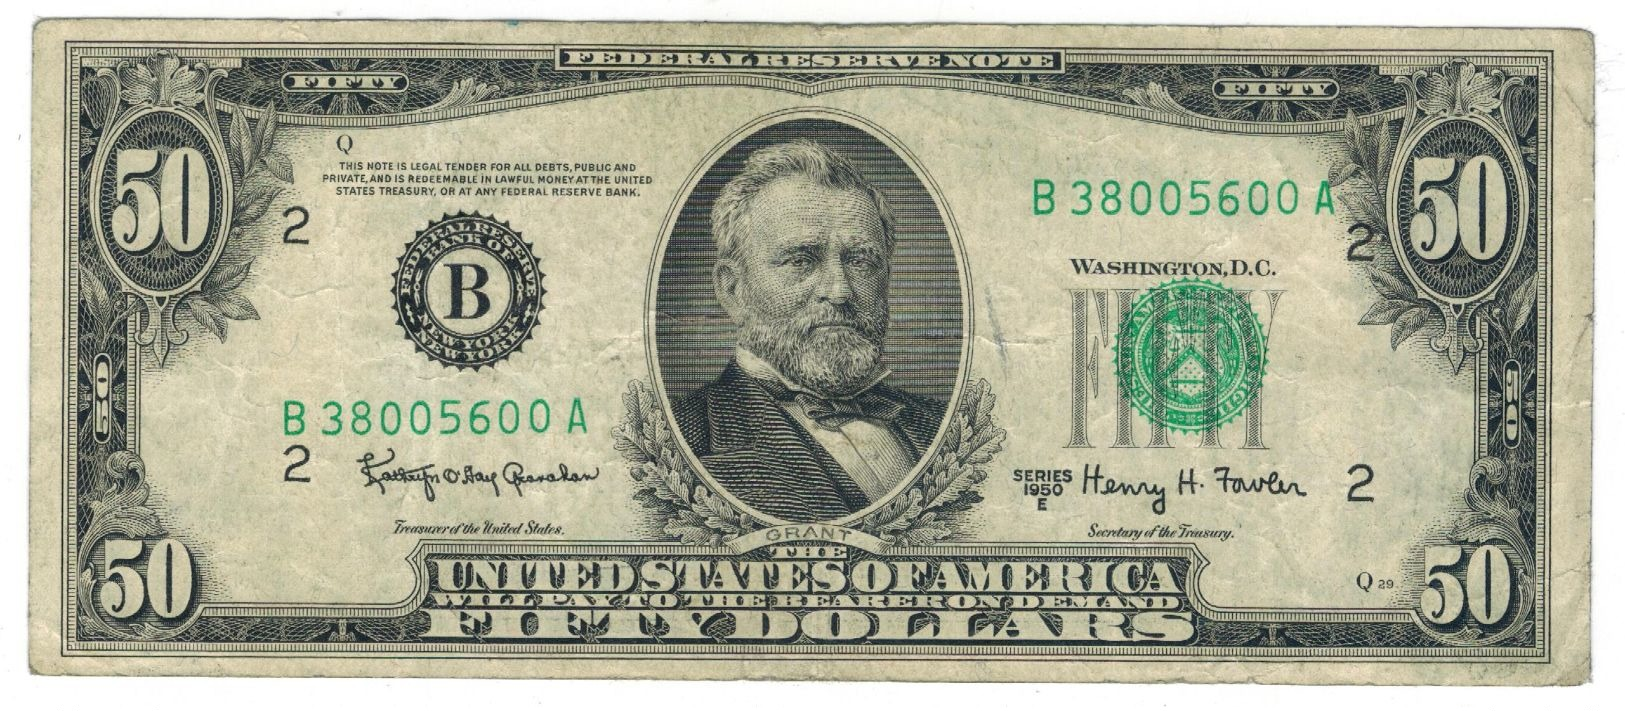 U.S.A. 50 Dollars , 1950 E. Used, See Scan. Rare. - United States Notes (1928-1953)